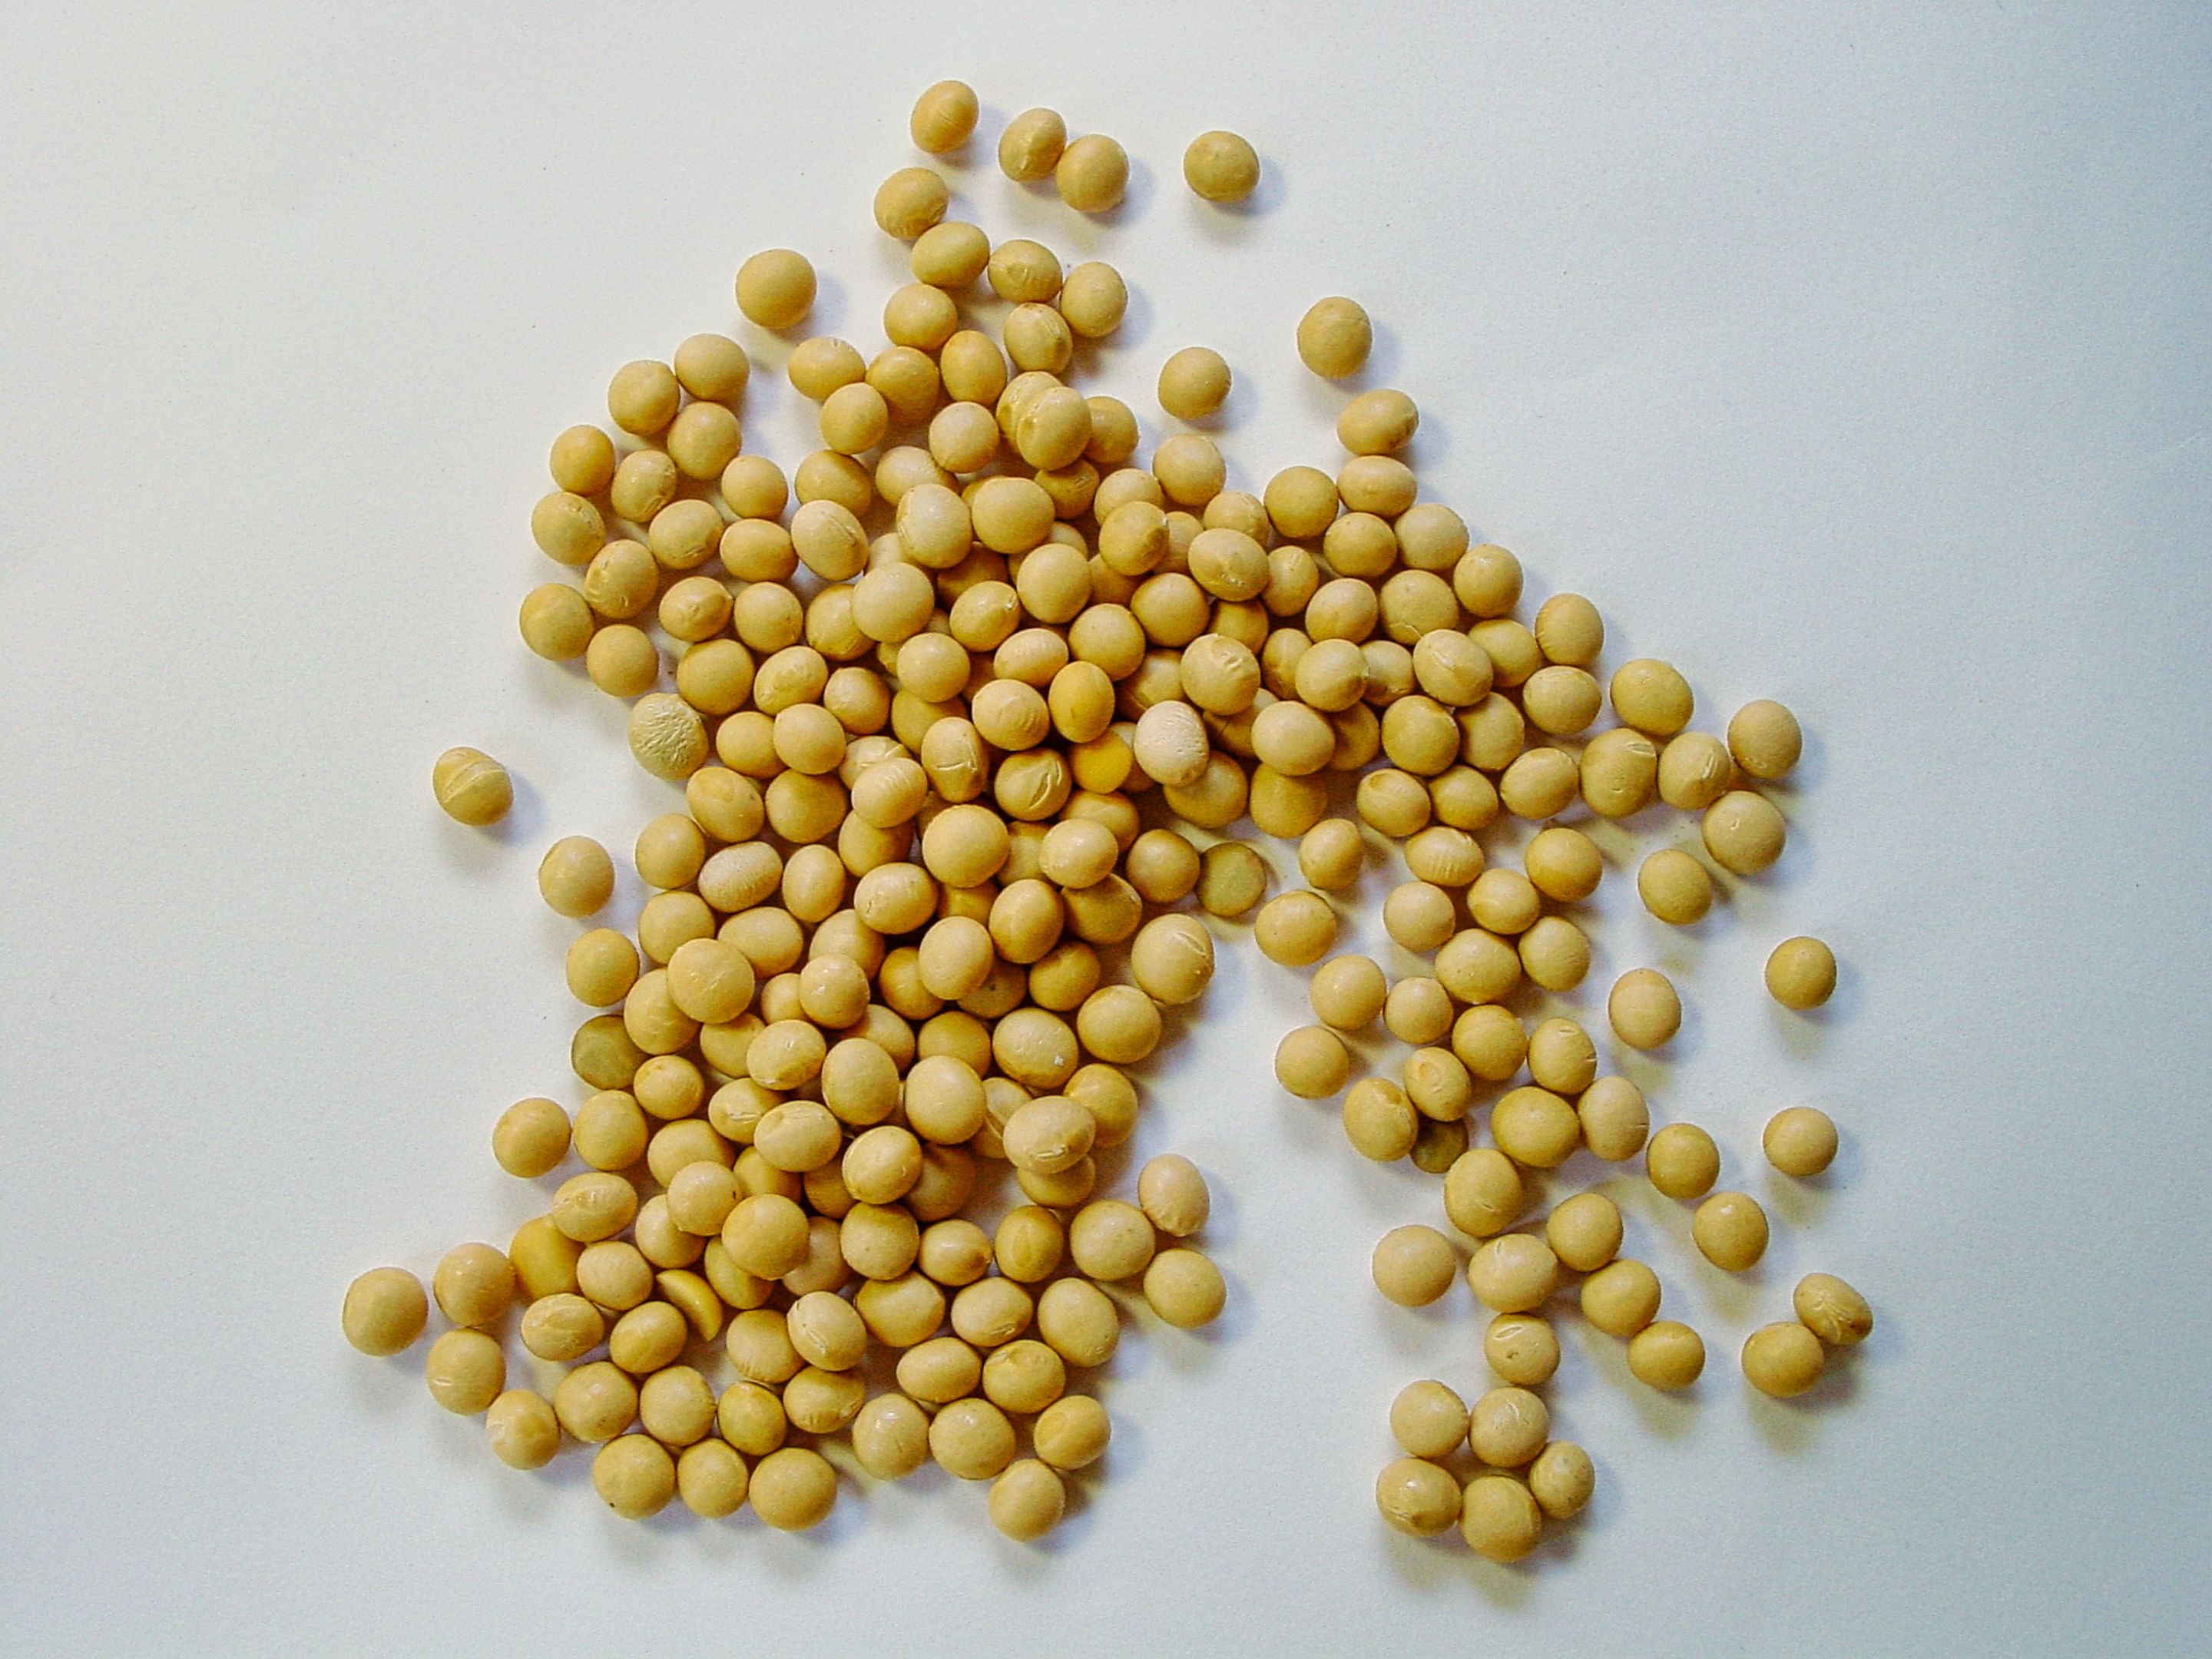 soy isoflavone supplements, animal protein, health benefits of soy, 